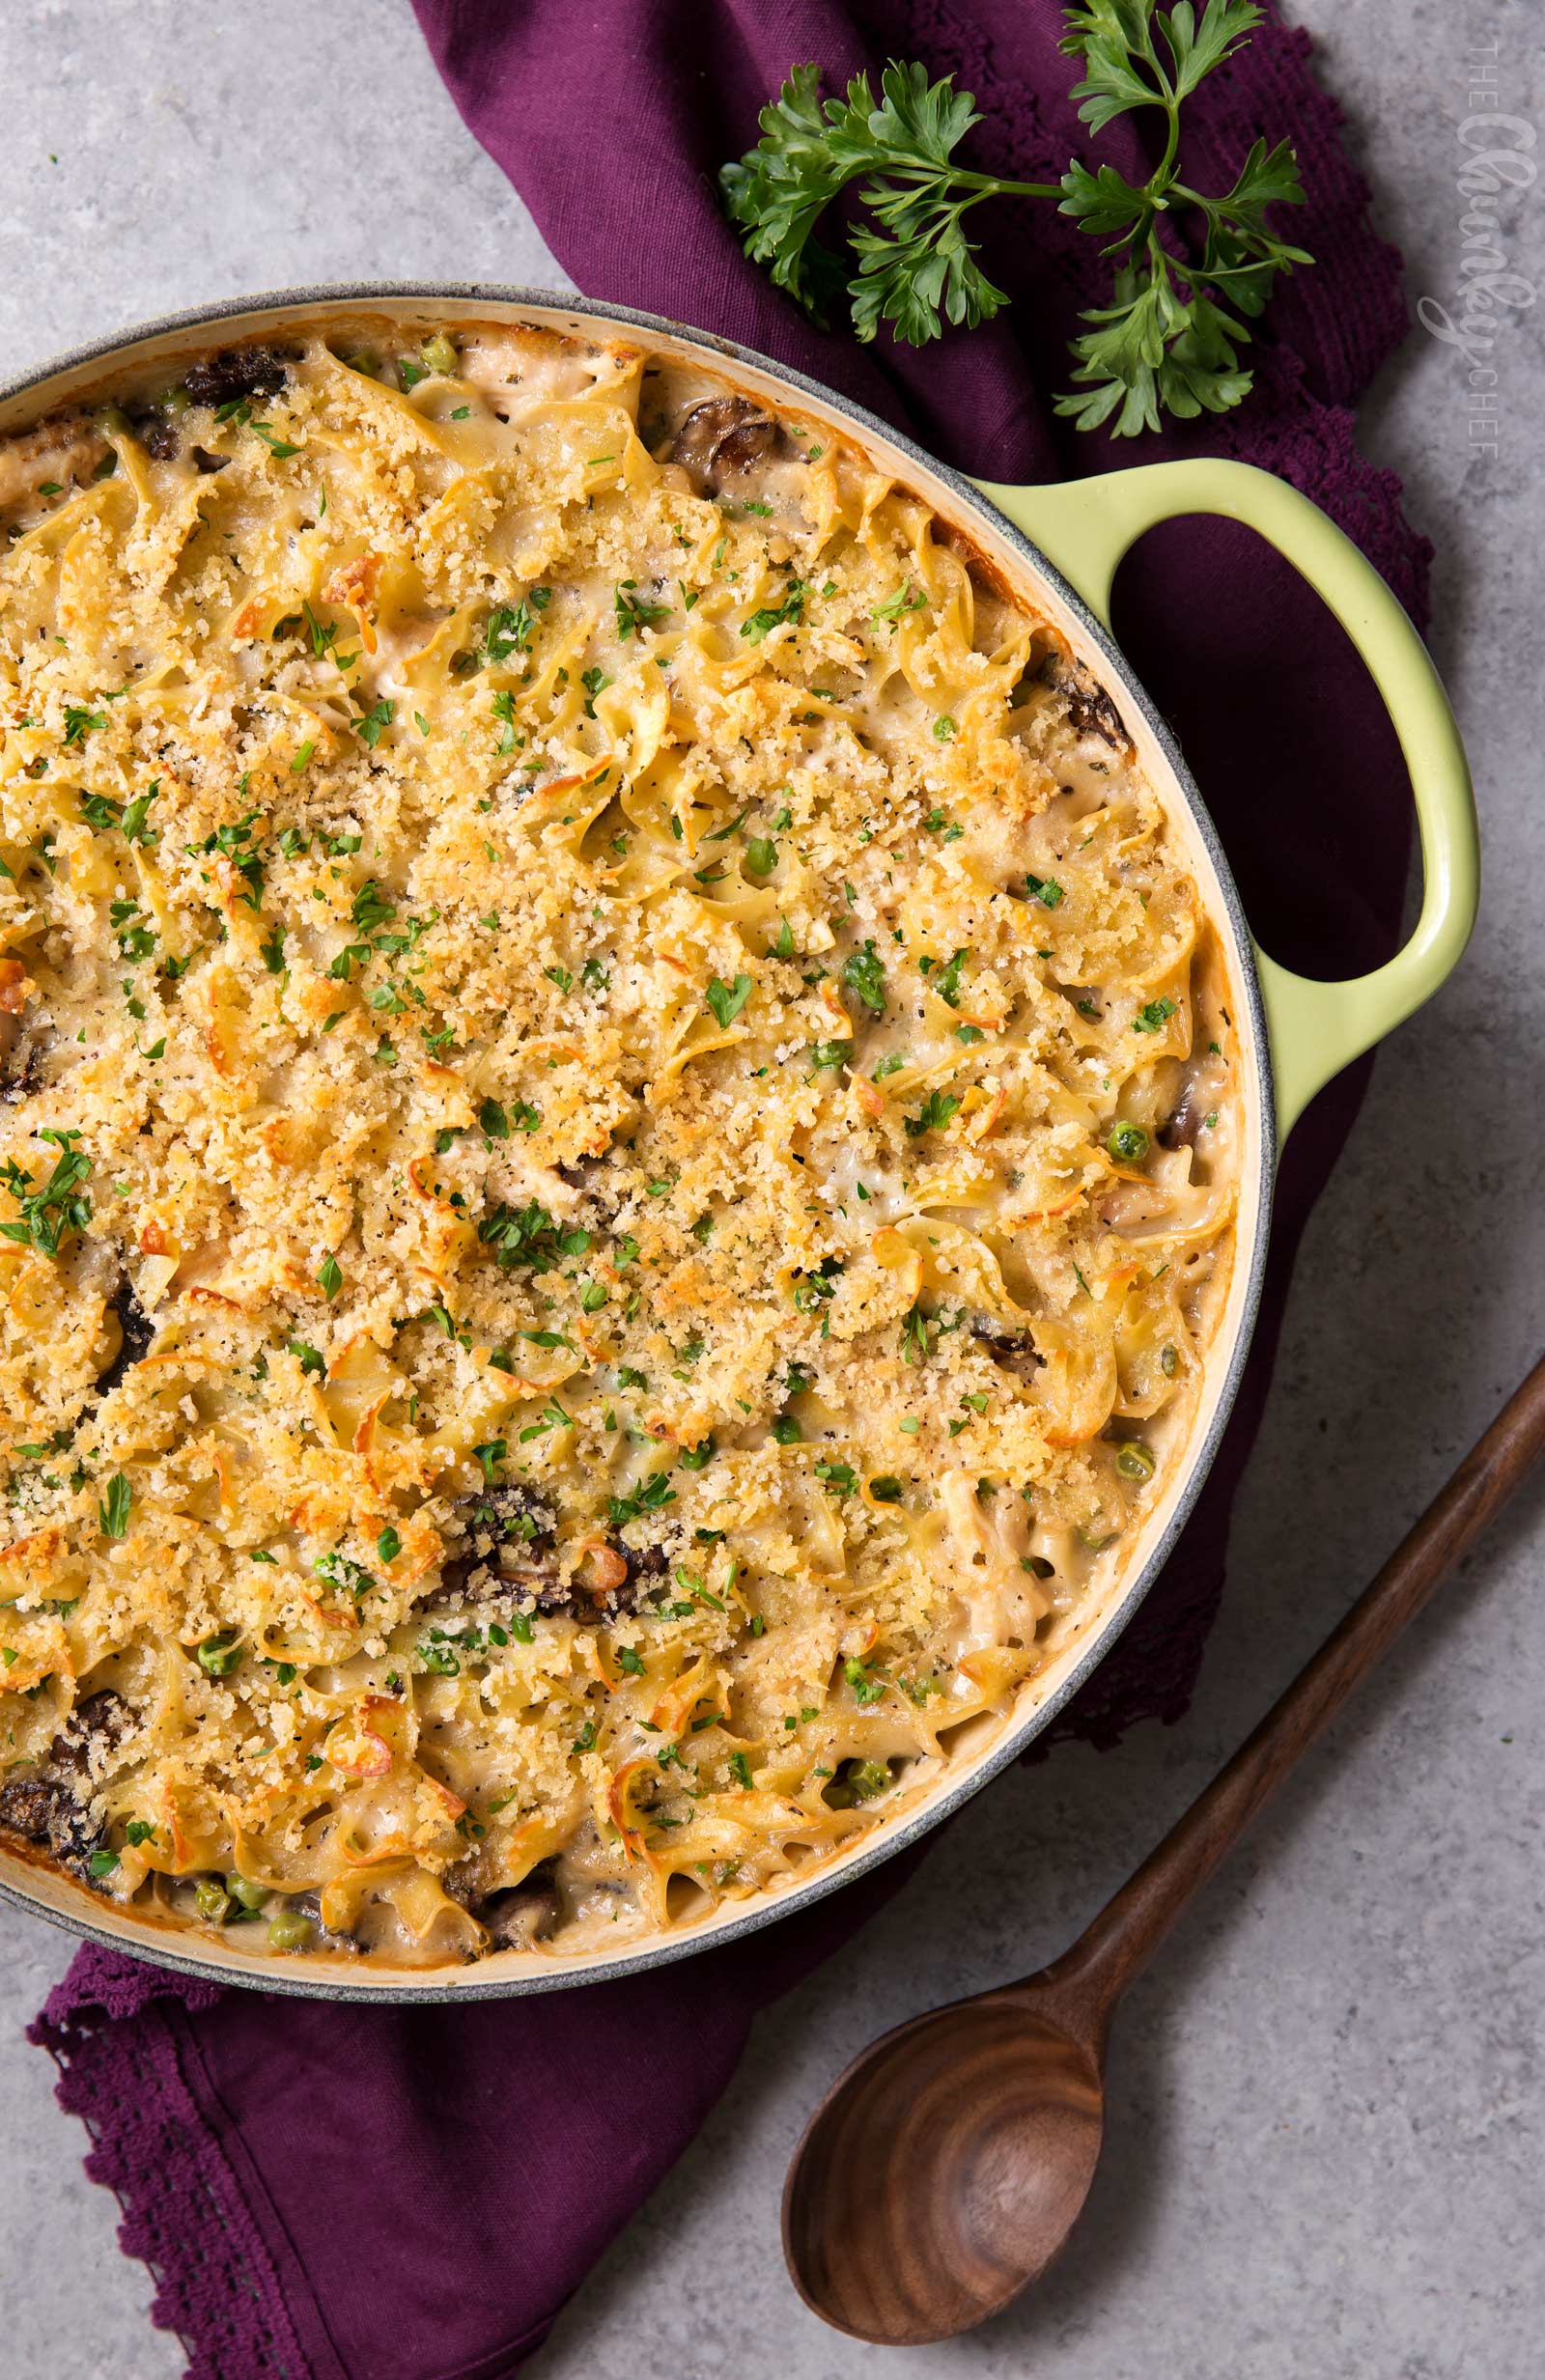 One Pot Chicken Tetrazzini | Perfect for an easy dinner, this chicken tetrazzini recipe is a comforting, incredibly creamy pasta bake with chicken, mushrooms!  This is one chicken casserole you'll be happy to eat, any time of year.  Great for make-ahead meals too! | The Chunky Chef | #chickentetrazzini #pastabake #casserole #chickenrecipes #italianrecipes